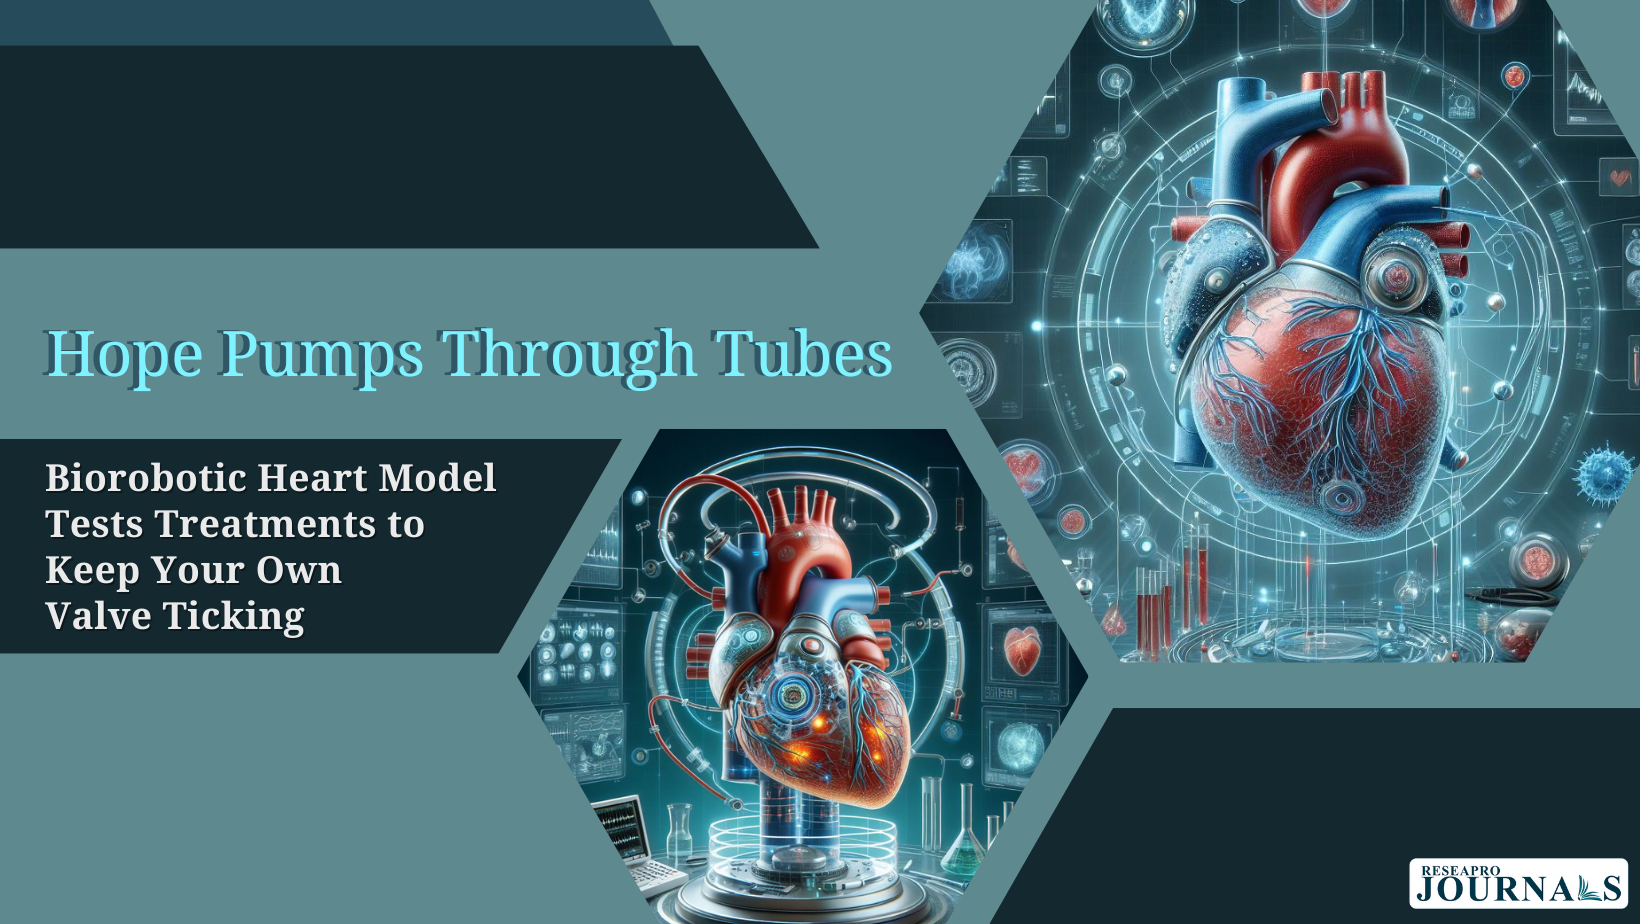 Hope Pumps Through Tubes: Biorobotic Heart Model Tests Treatments to Keep Your Own Valve Ticking